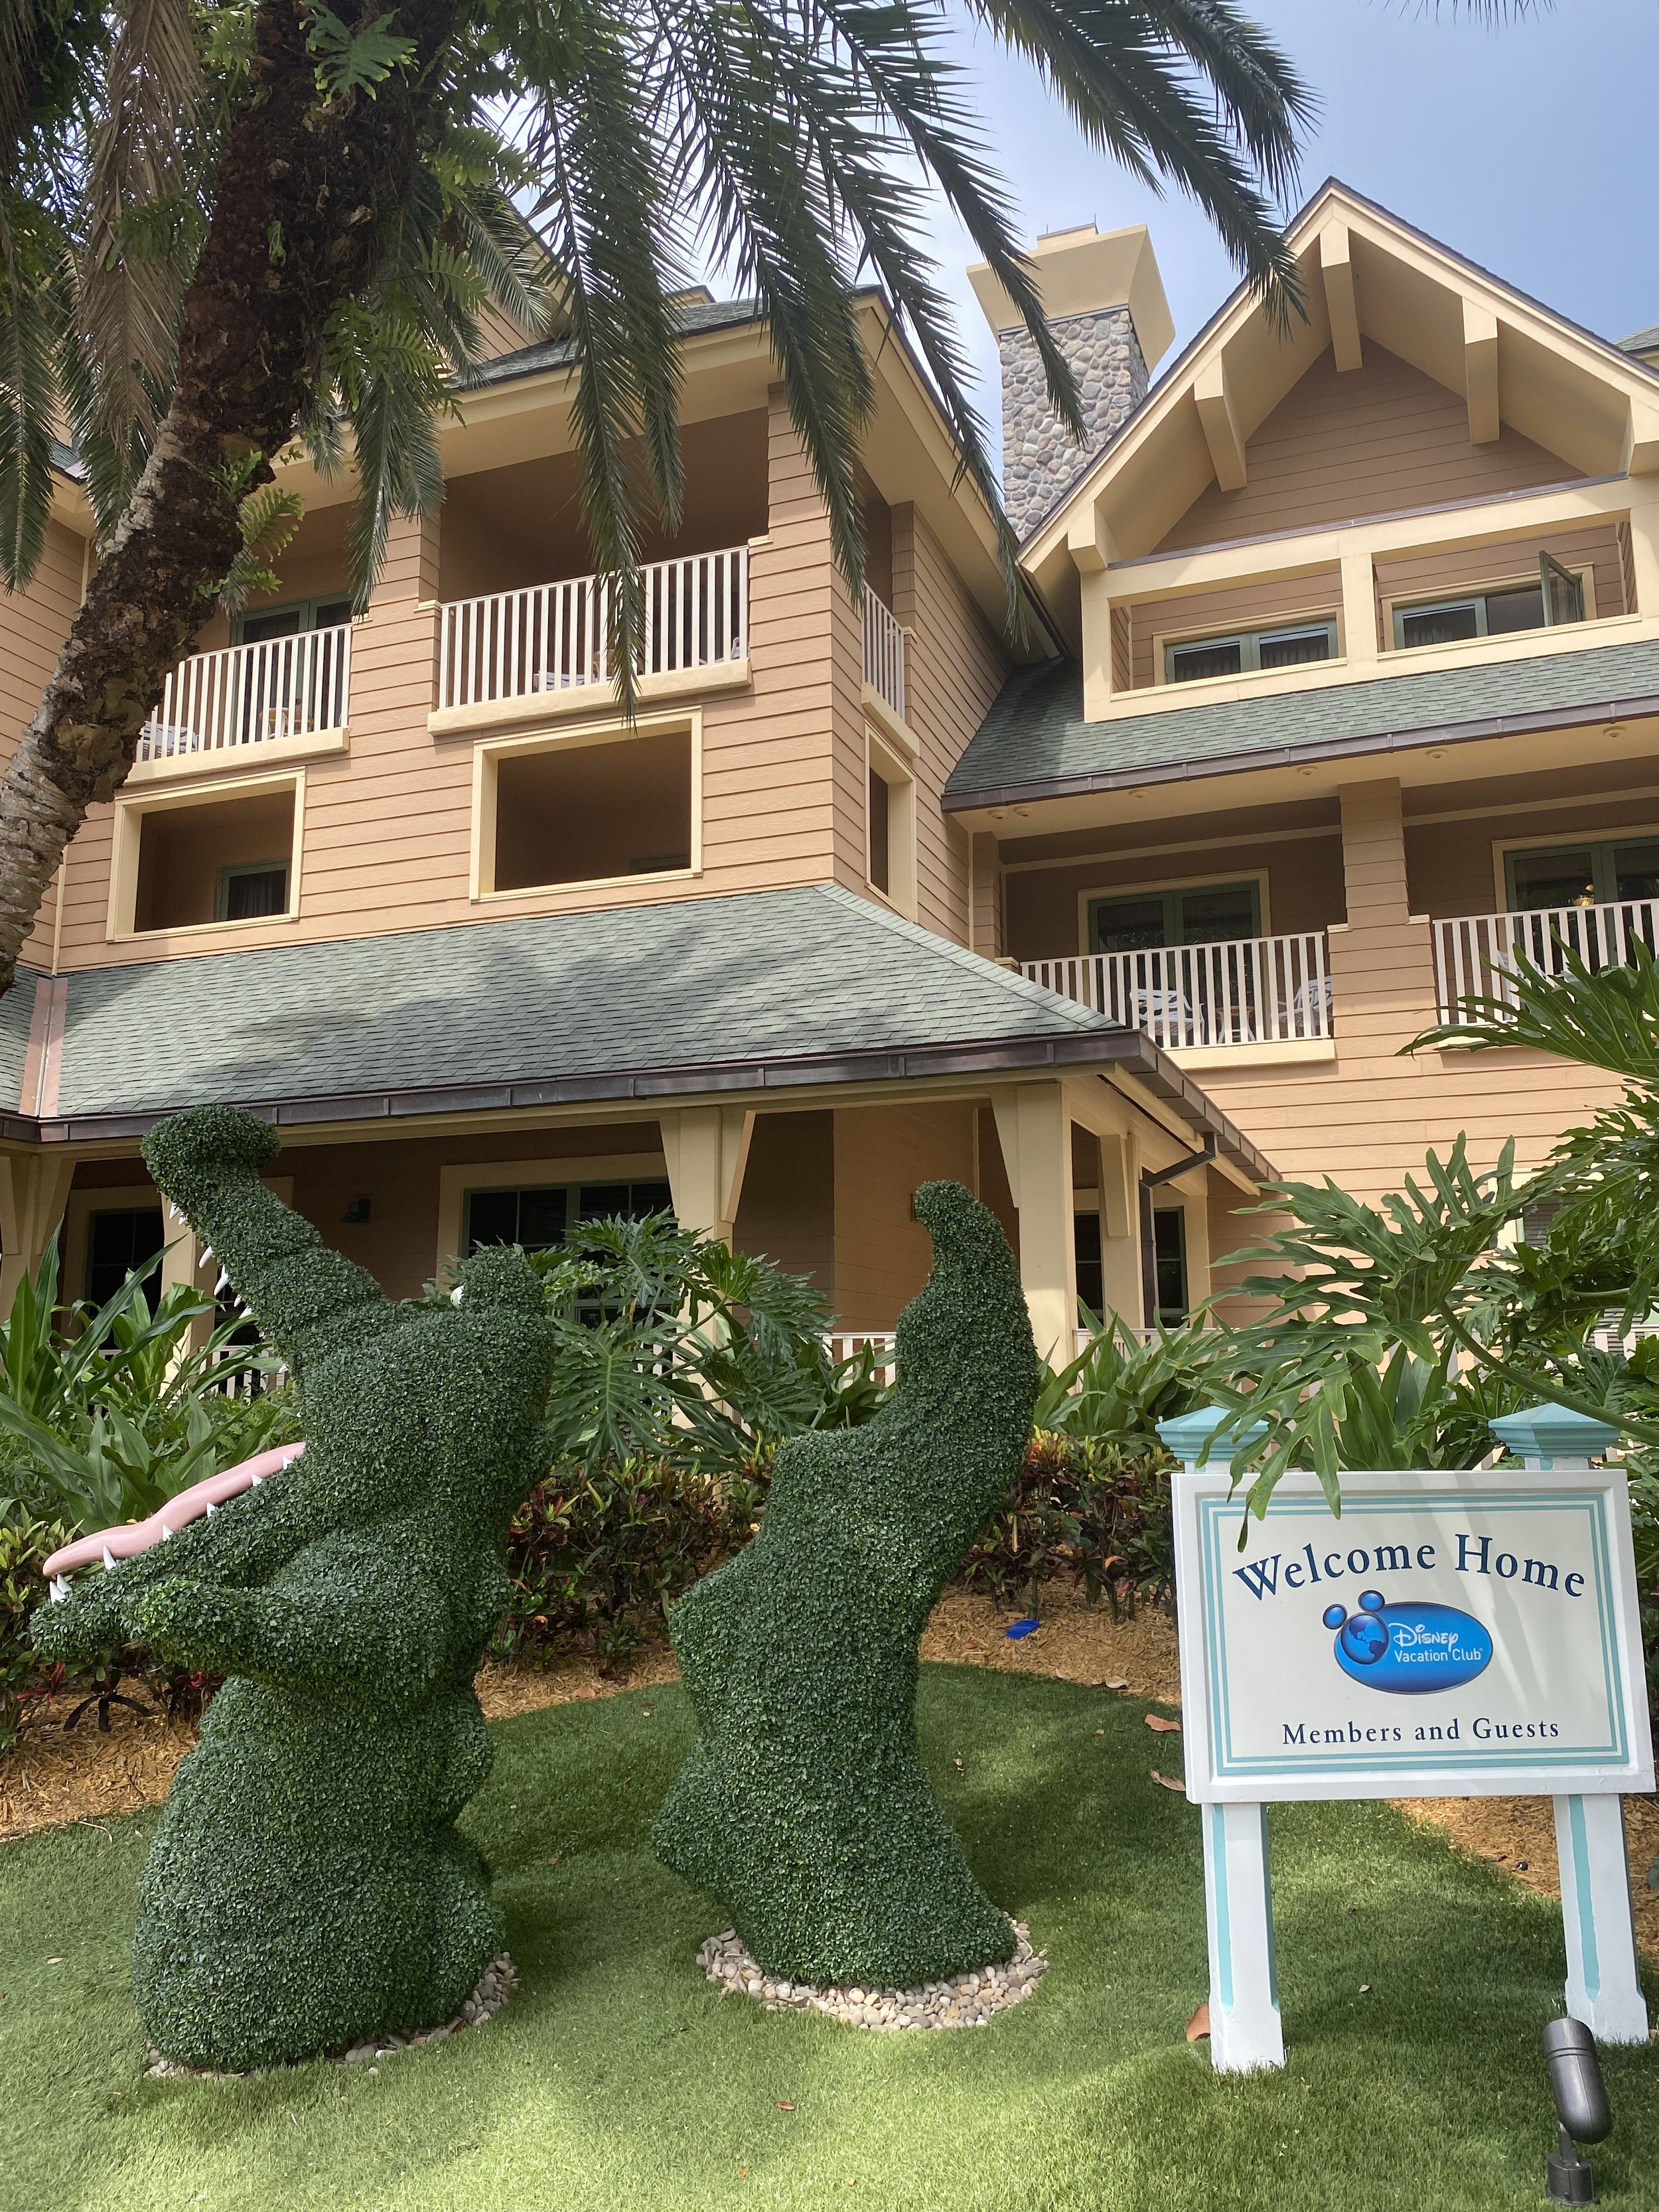  While  Disney’s Vero Beach Resort  is part of the Disney Vacation Club family, even non-members can stay here.     The Disney Vacation Club is Disney’s version of a timeshare program.     Non-members may find that availability is limited. The hotel 